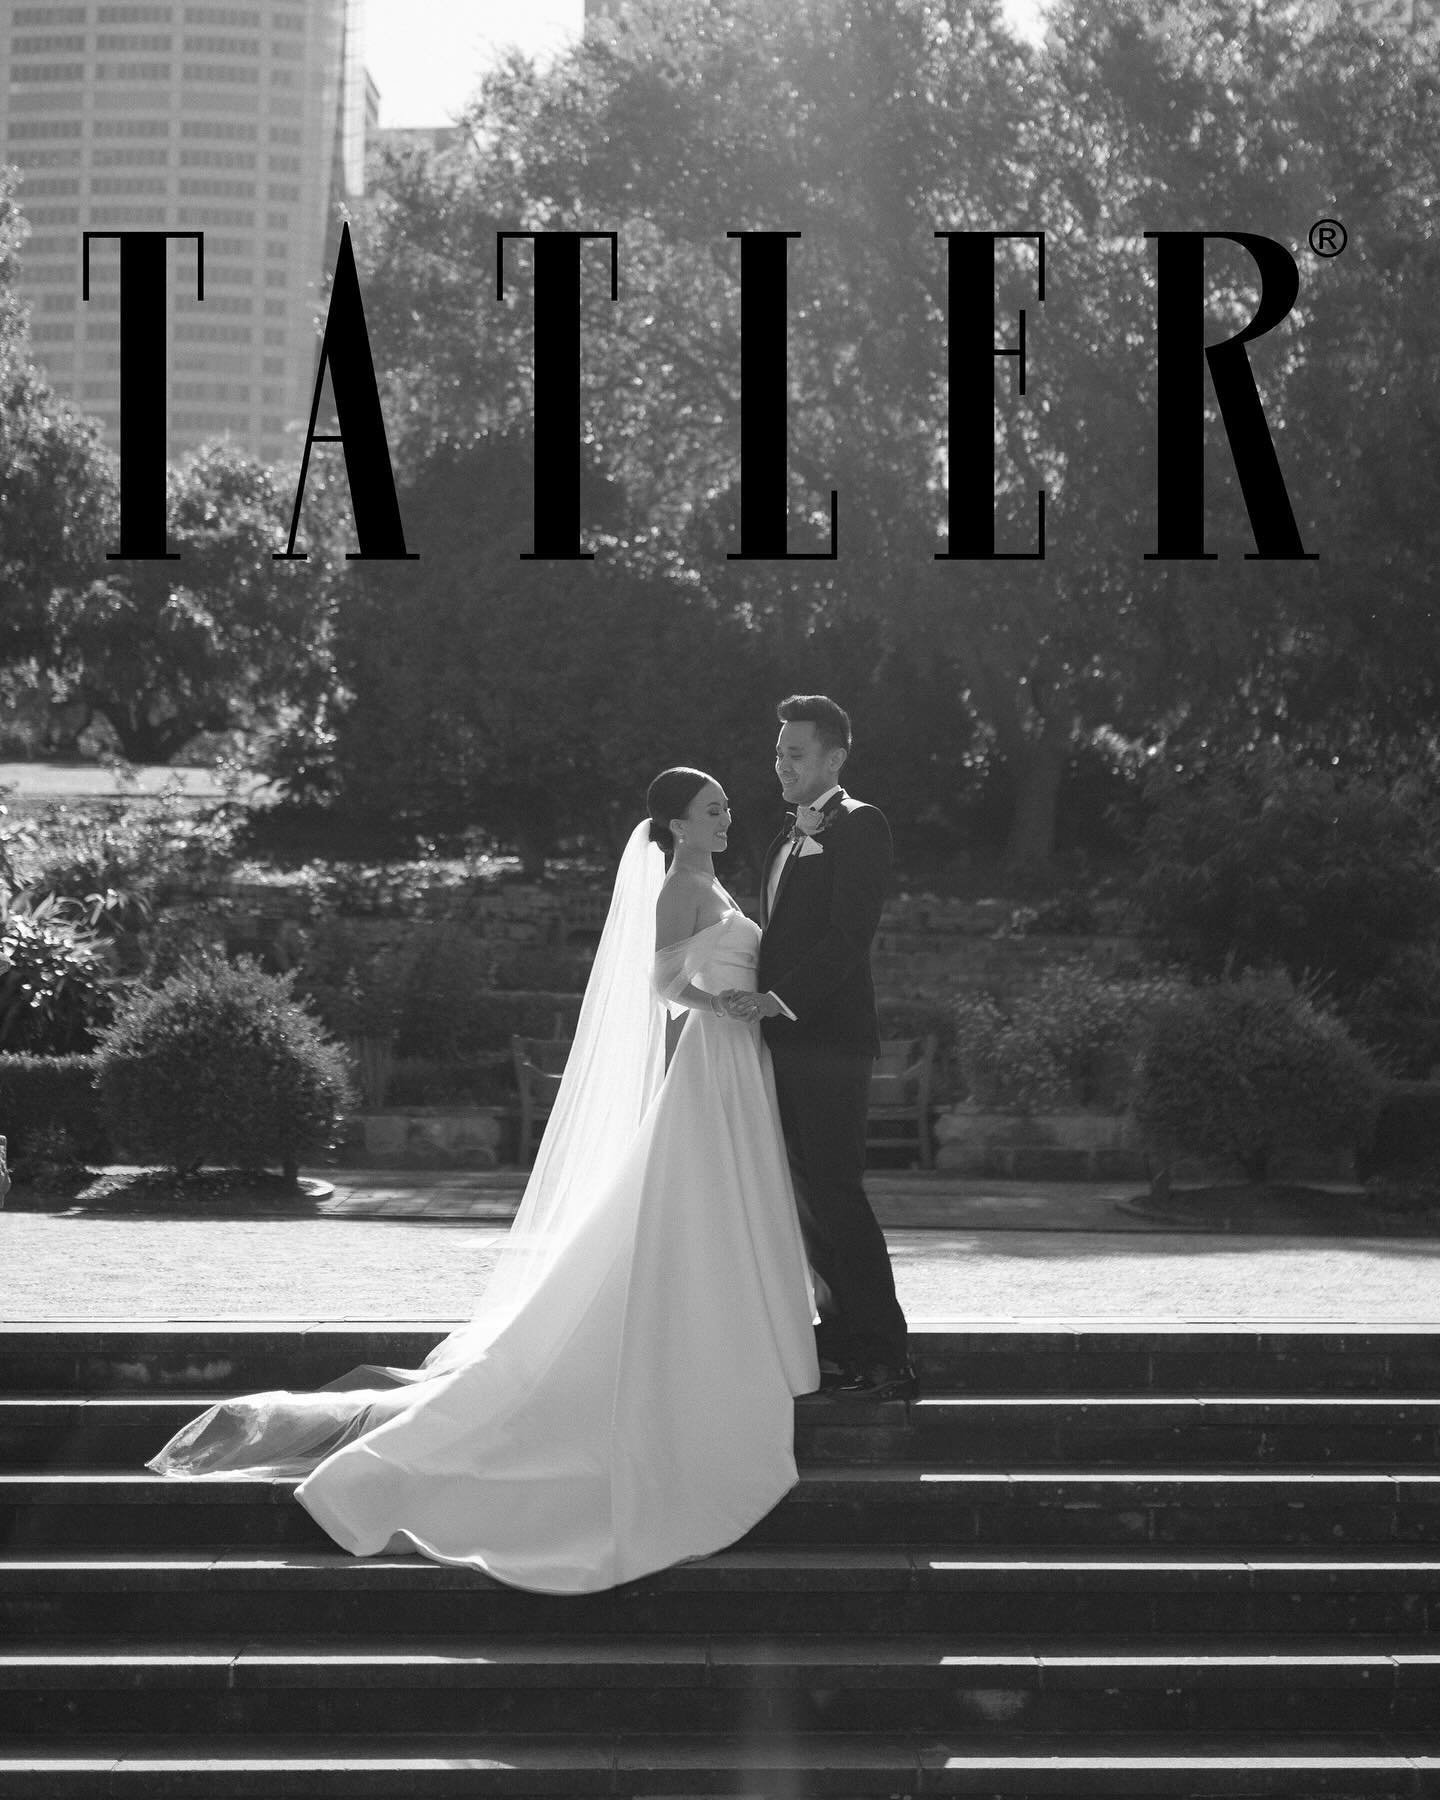 The gorgeous Emily &amp; Chad as seen in next months Tatler Magazine ✨⁣
⁣
Photography @for_modernromantics⁣
Ceremony @museumsofhistorynsw ⁣
Reception @thegroundsevents 
Emily Dressed By @evieyoungbridal @luvbridal @loefflerrandall @becandbridge 
Hair